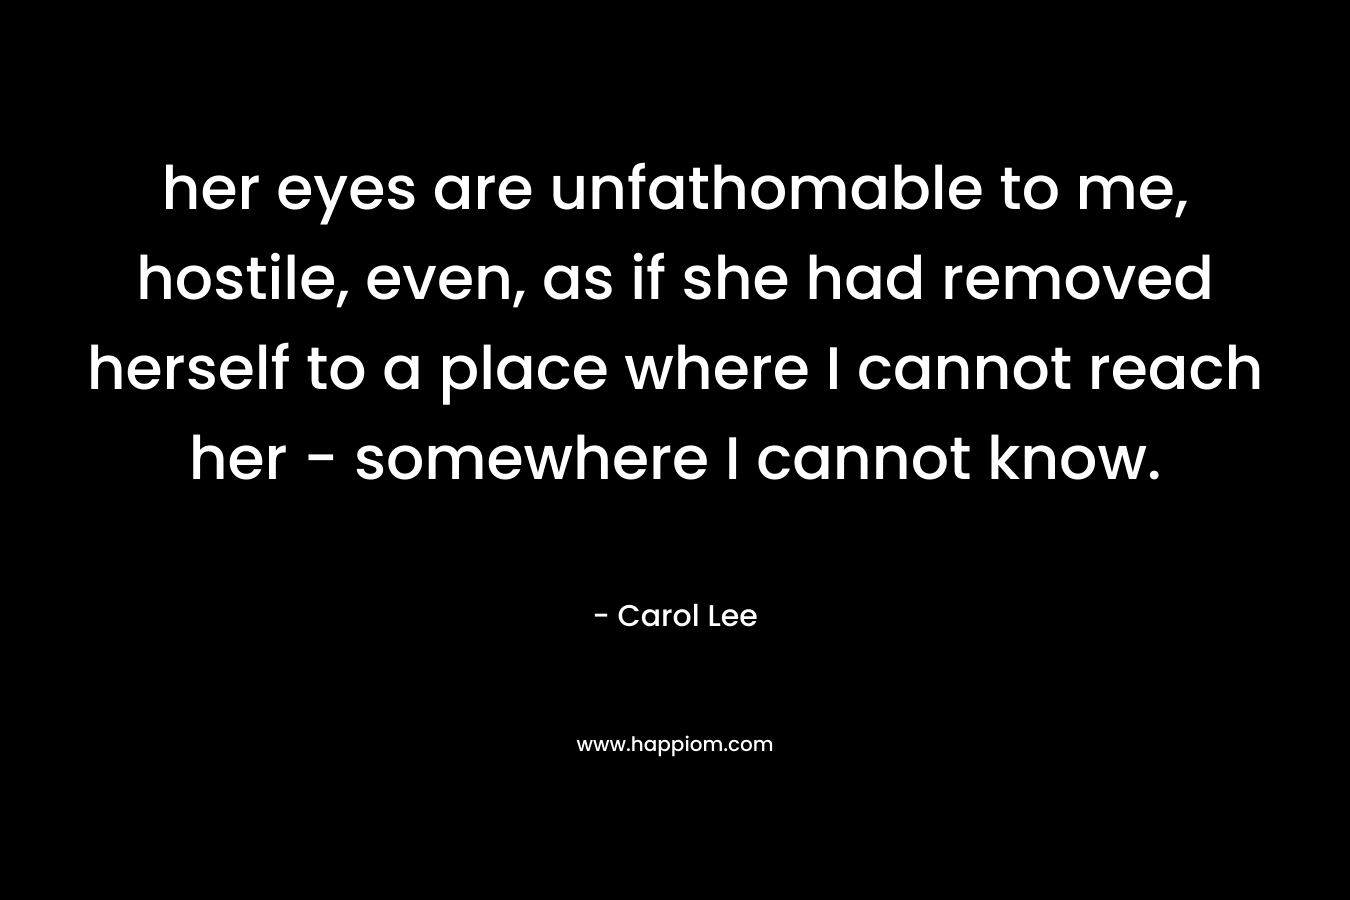 her eyes are unfathomable to me, hostile, even, as if she had removed herself to a place where I cannot reach her – somewhere I cannot know. – Carol Lee